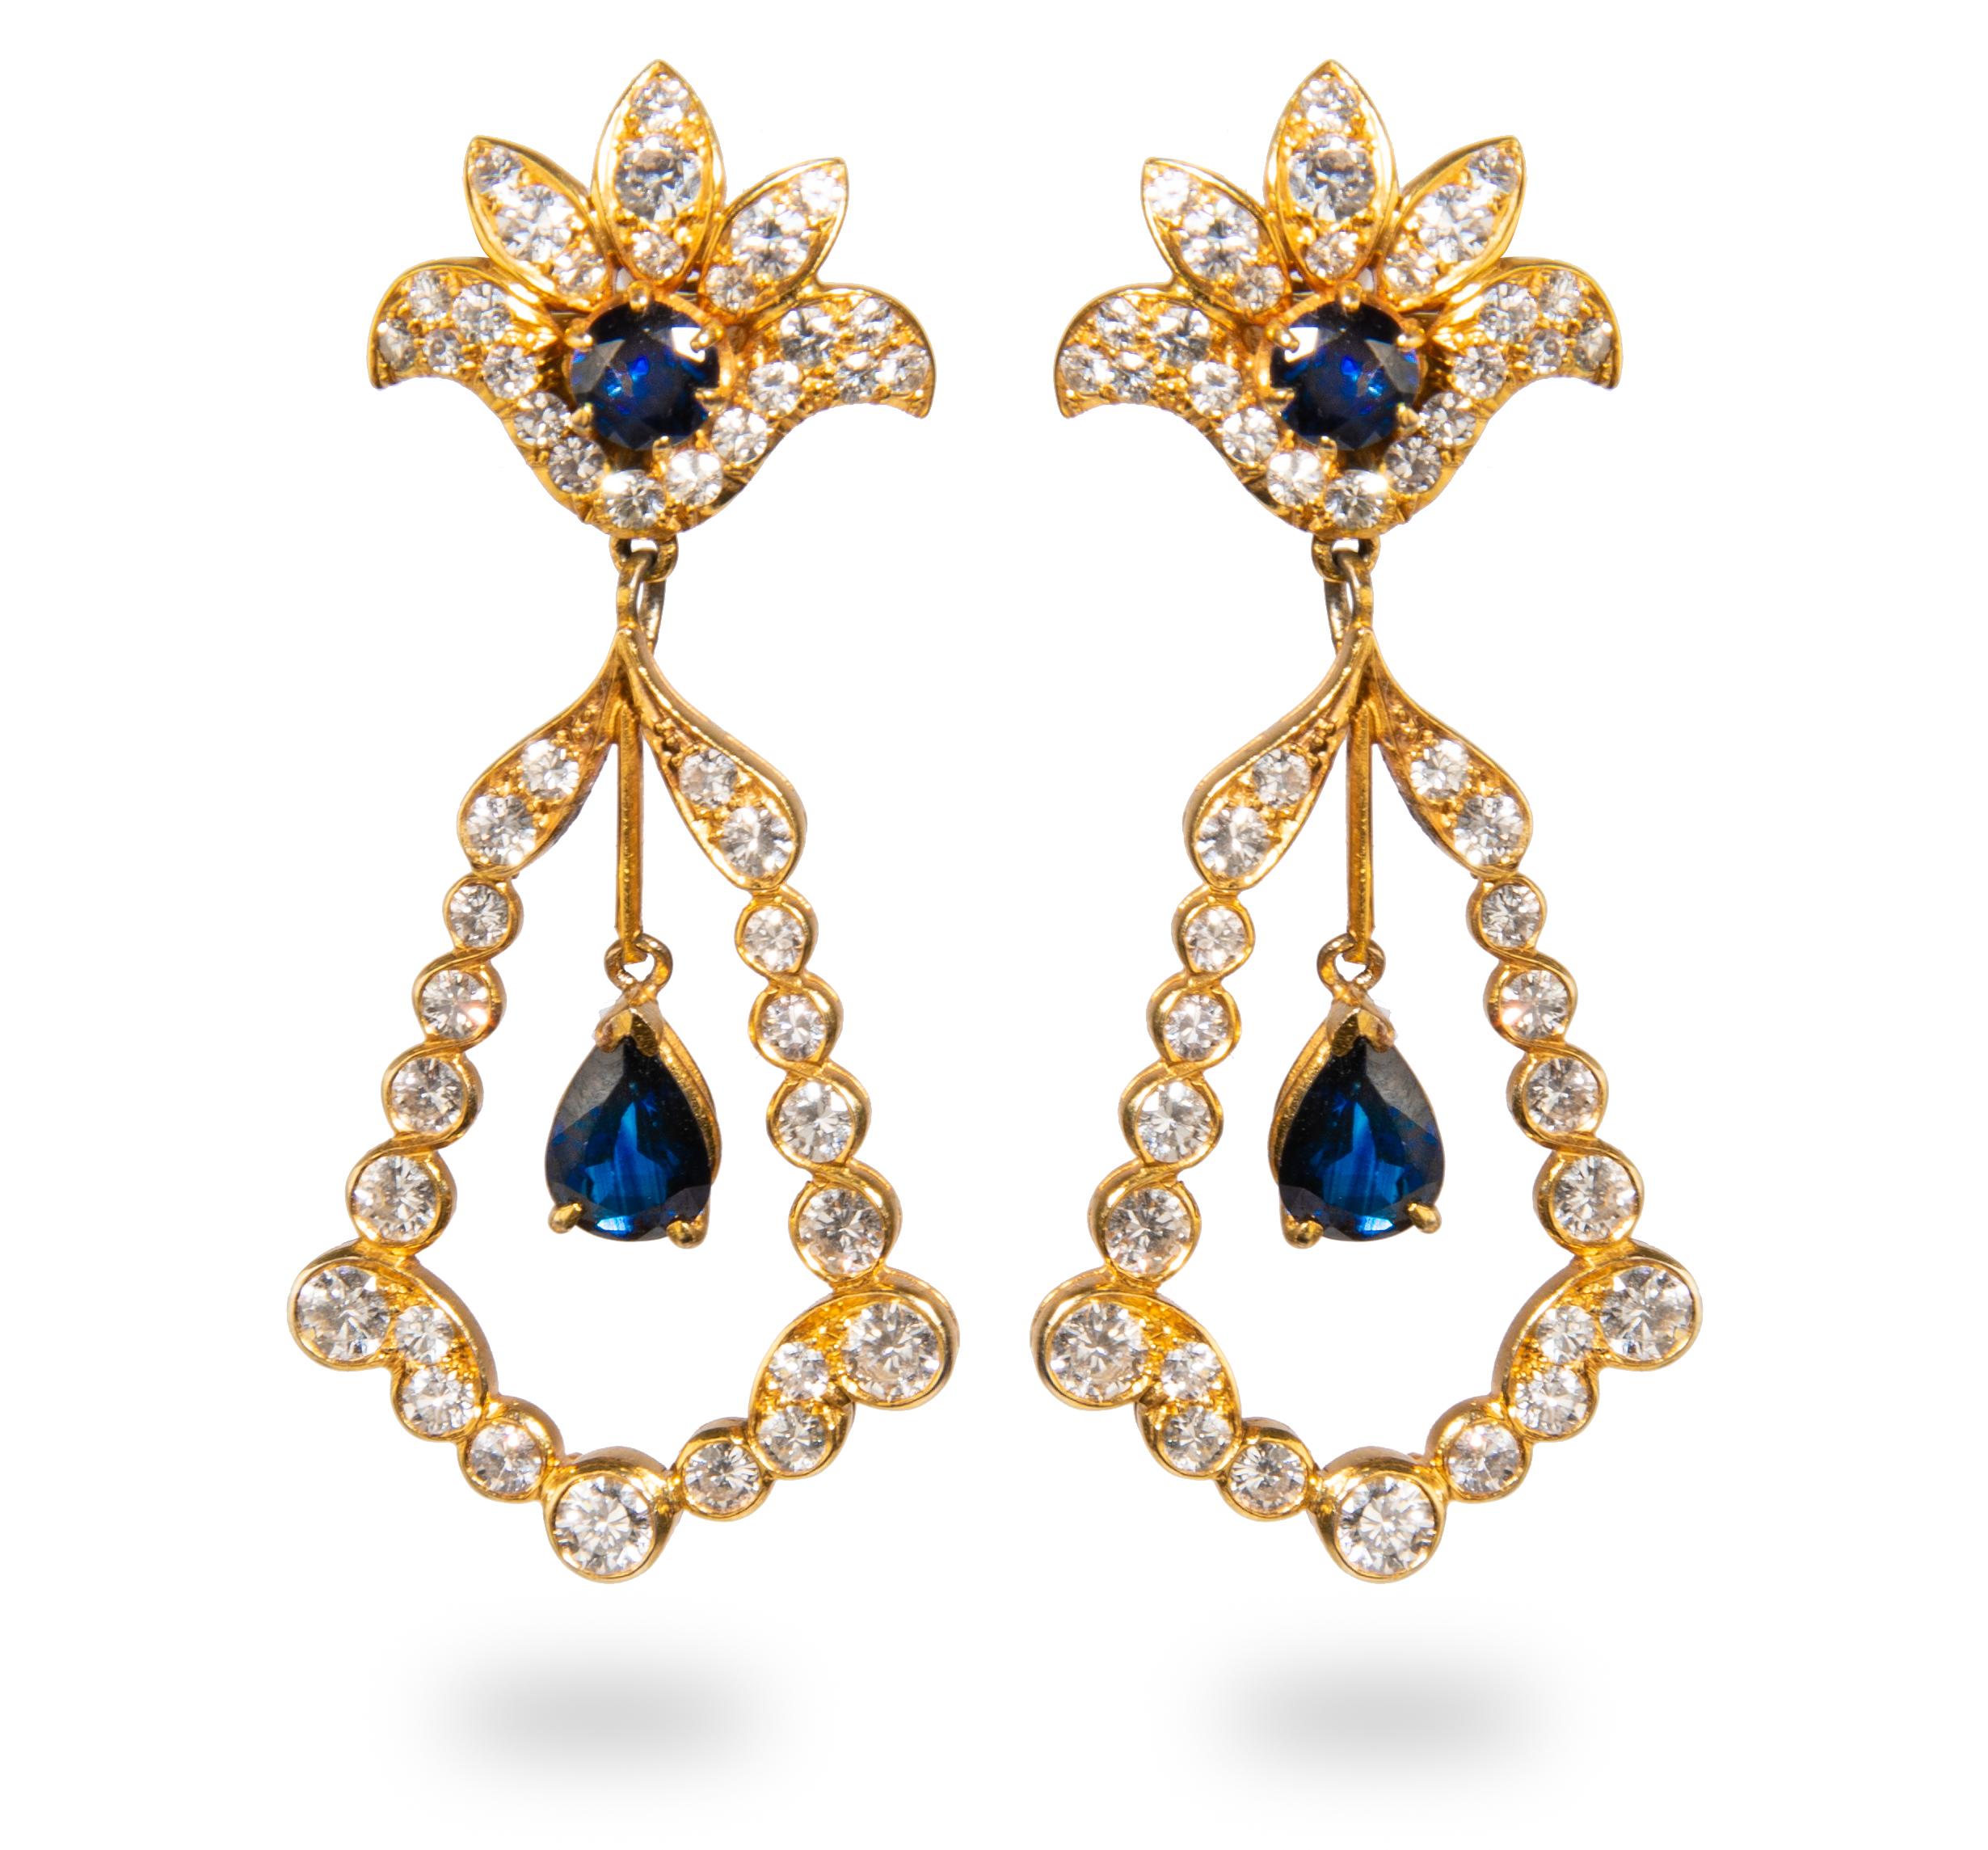 Yellow Gold, Sapphire and Diamond pair of earrings containing two pear shape mixed cut sapphires measuring approximately 7.00 x 5.20 x 3.10 mm, two round sapphires and 90 round brilliant cut diamonds weighing approximately 4.95 carats total.